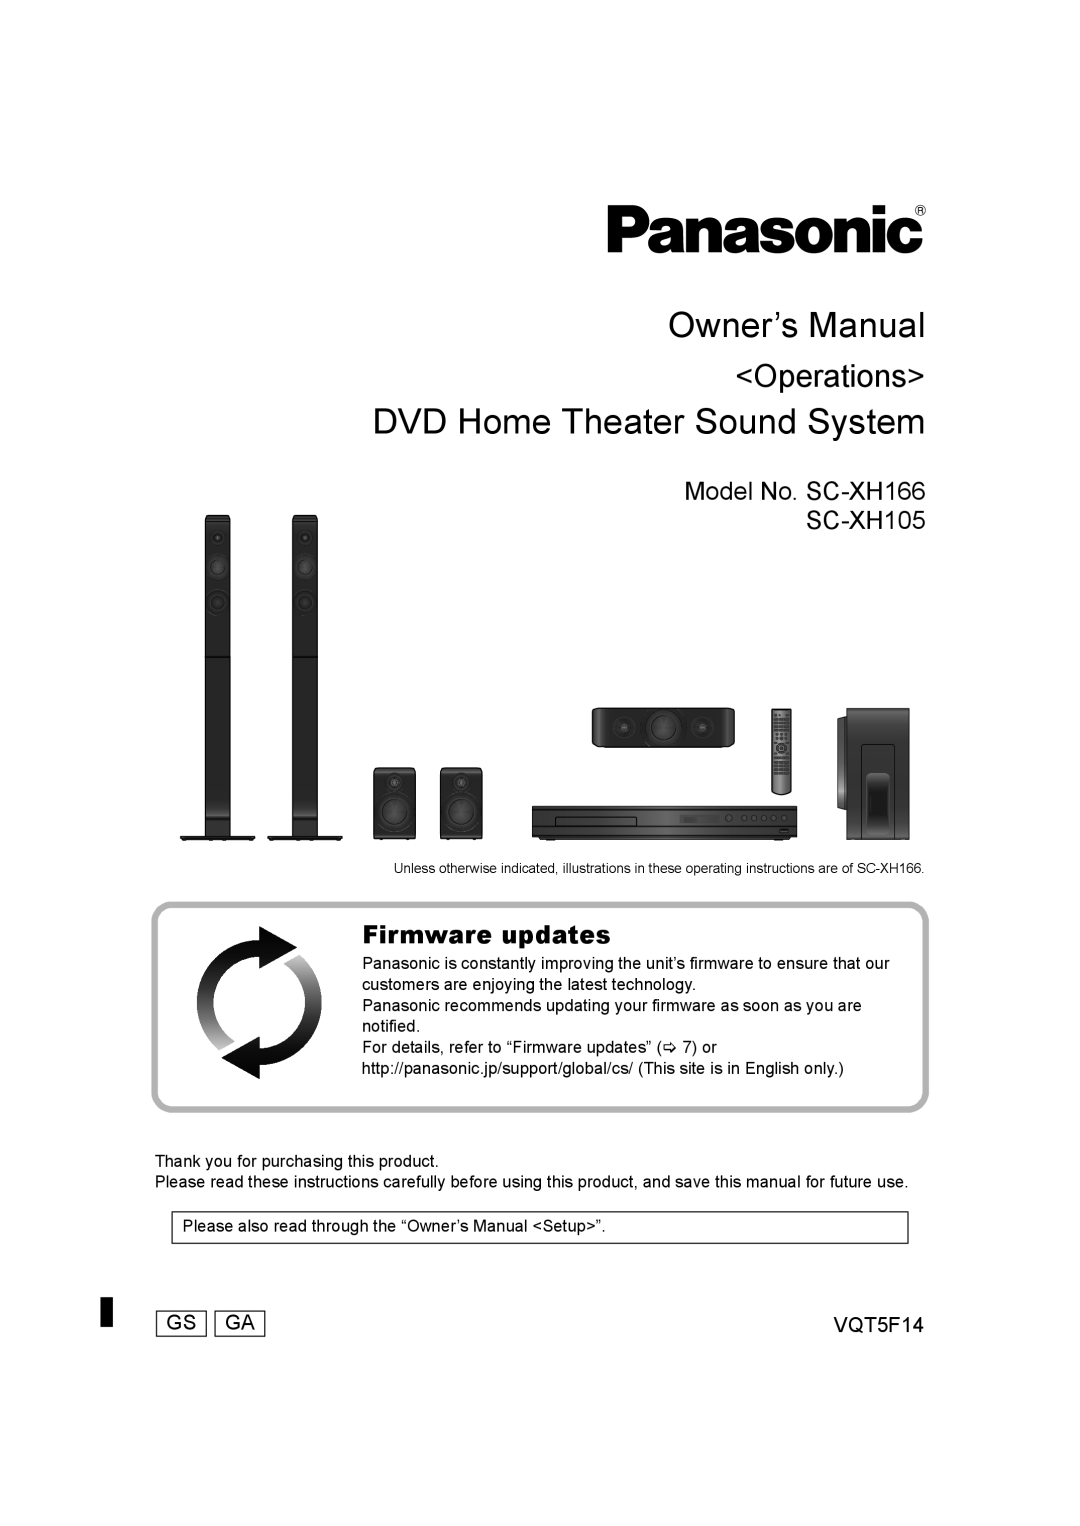 Panasonic SC-XH166 owner manual Gs Ga, VQT5F14, Owner’s Manual, DVD Home Theater Sound System, Operations 